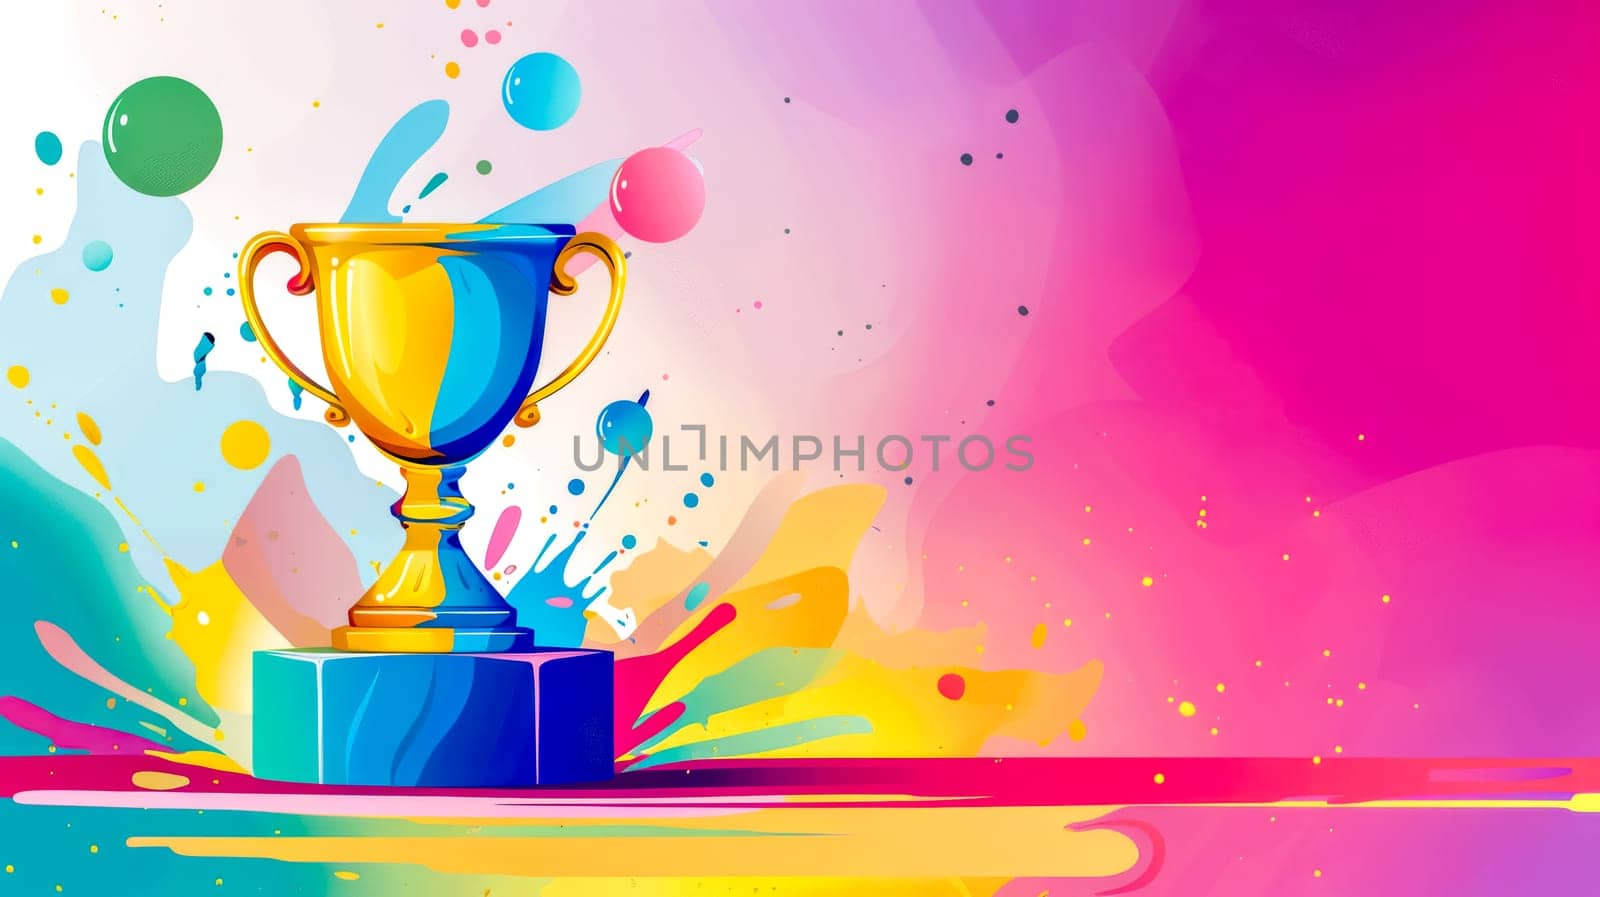 Colorful abstract background with a golden trophy amid splashes of paint by Edophoto